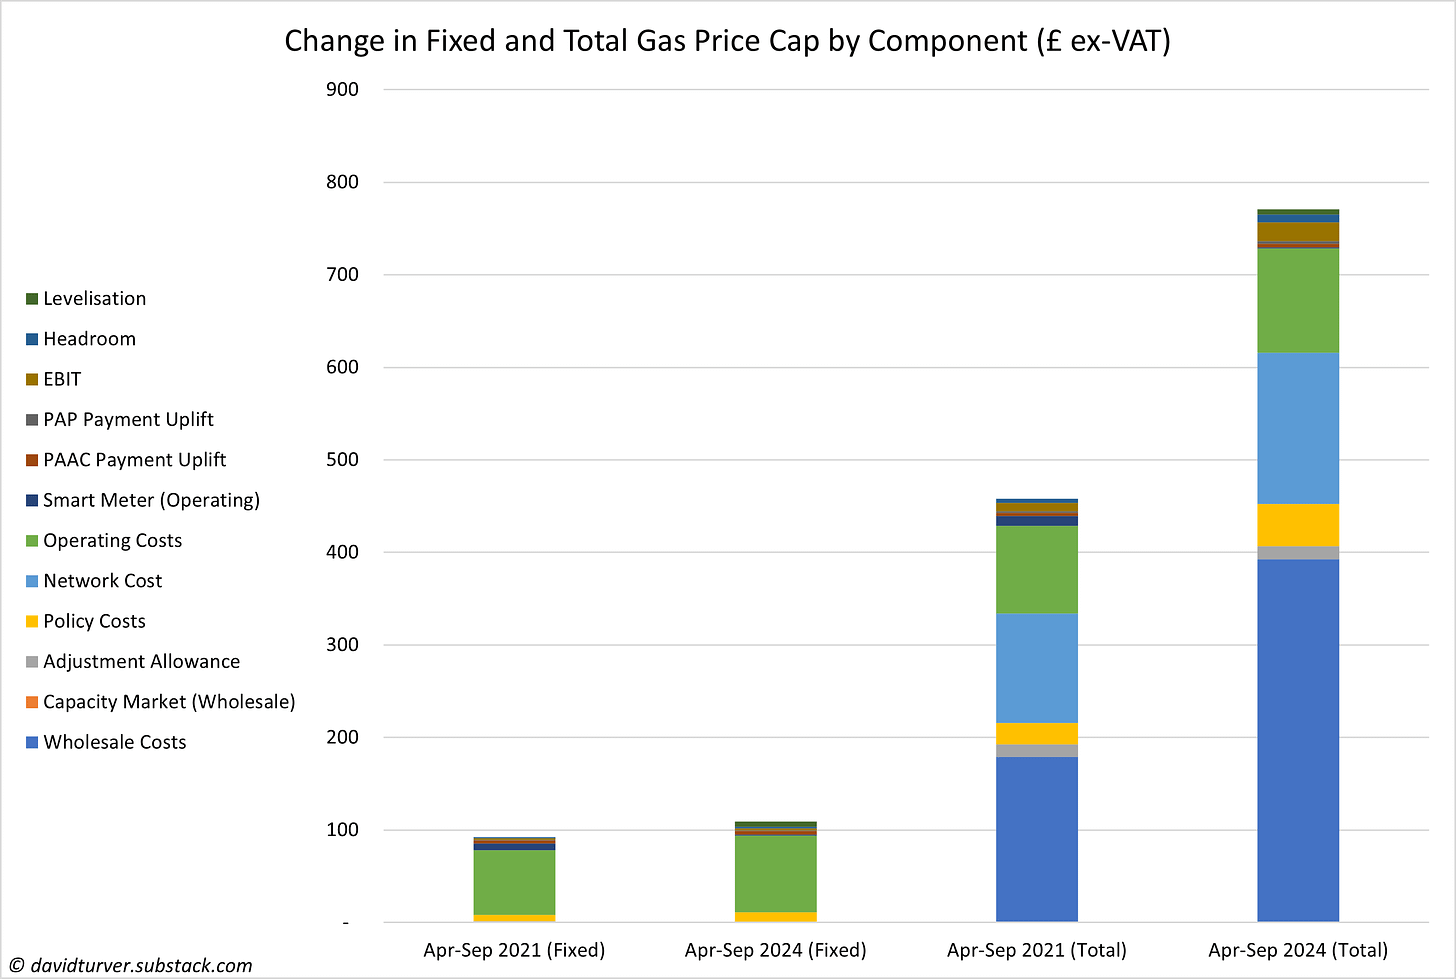 Figure 5 - Change in Fixed and Total Gas Price Cap by Component (£ ex-VAT)